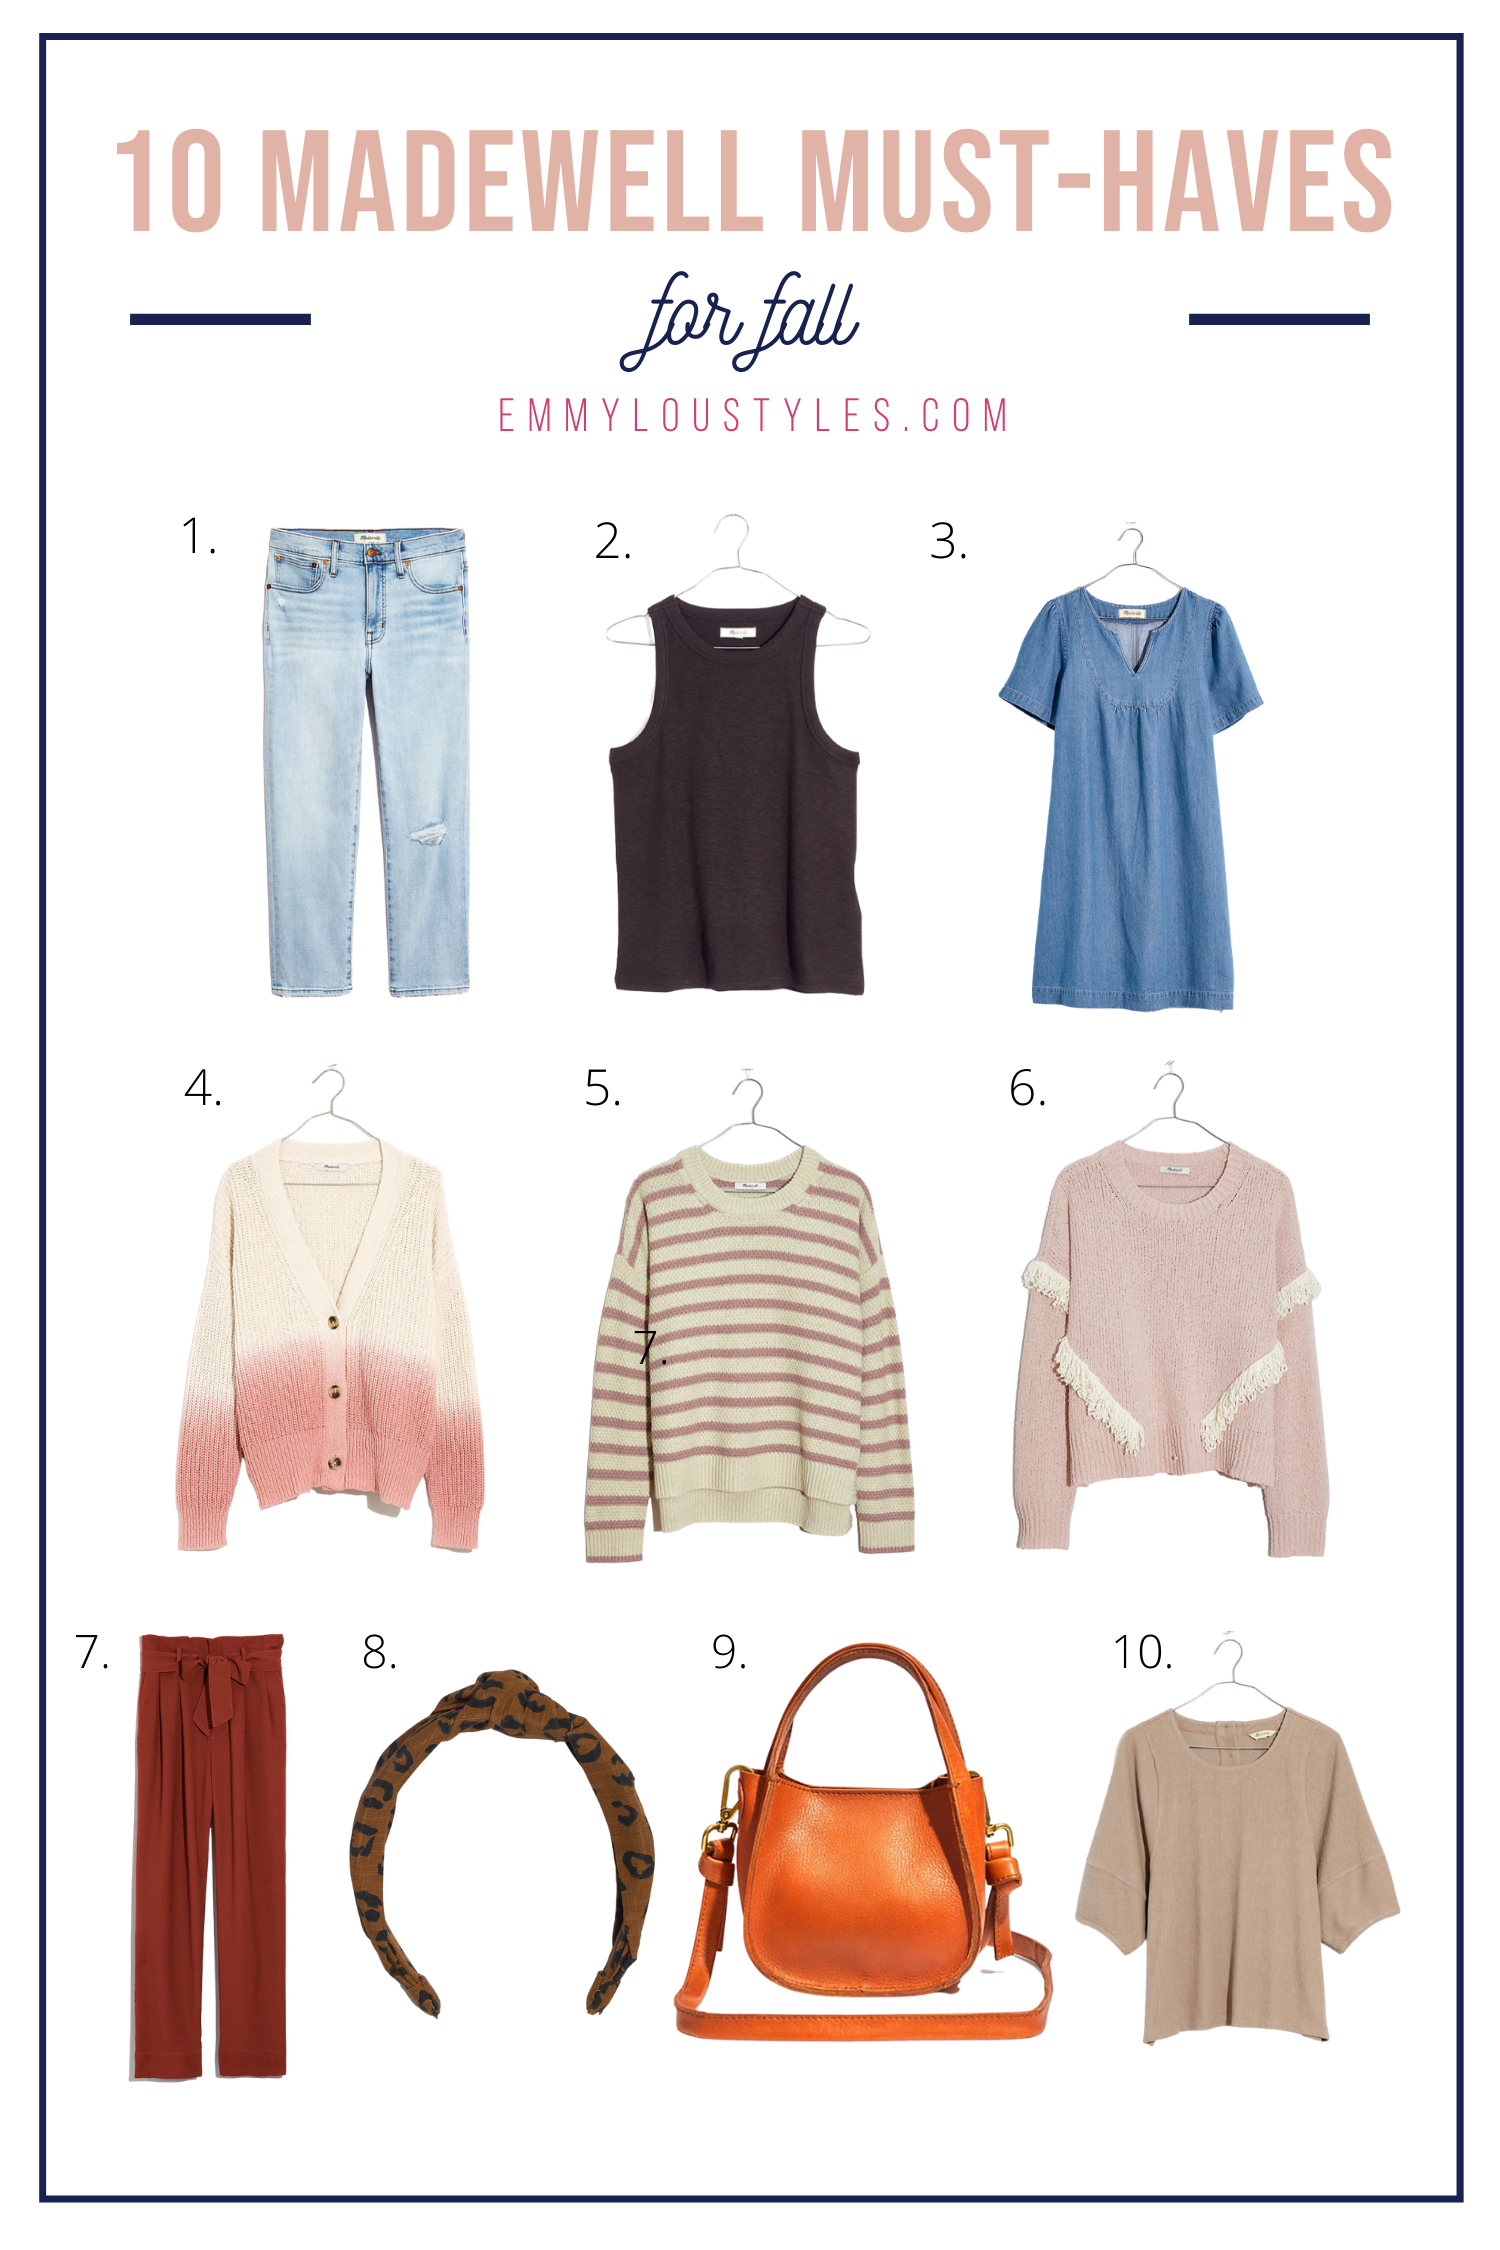 madewell must haves for fall